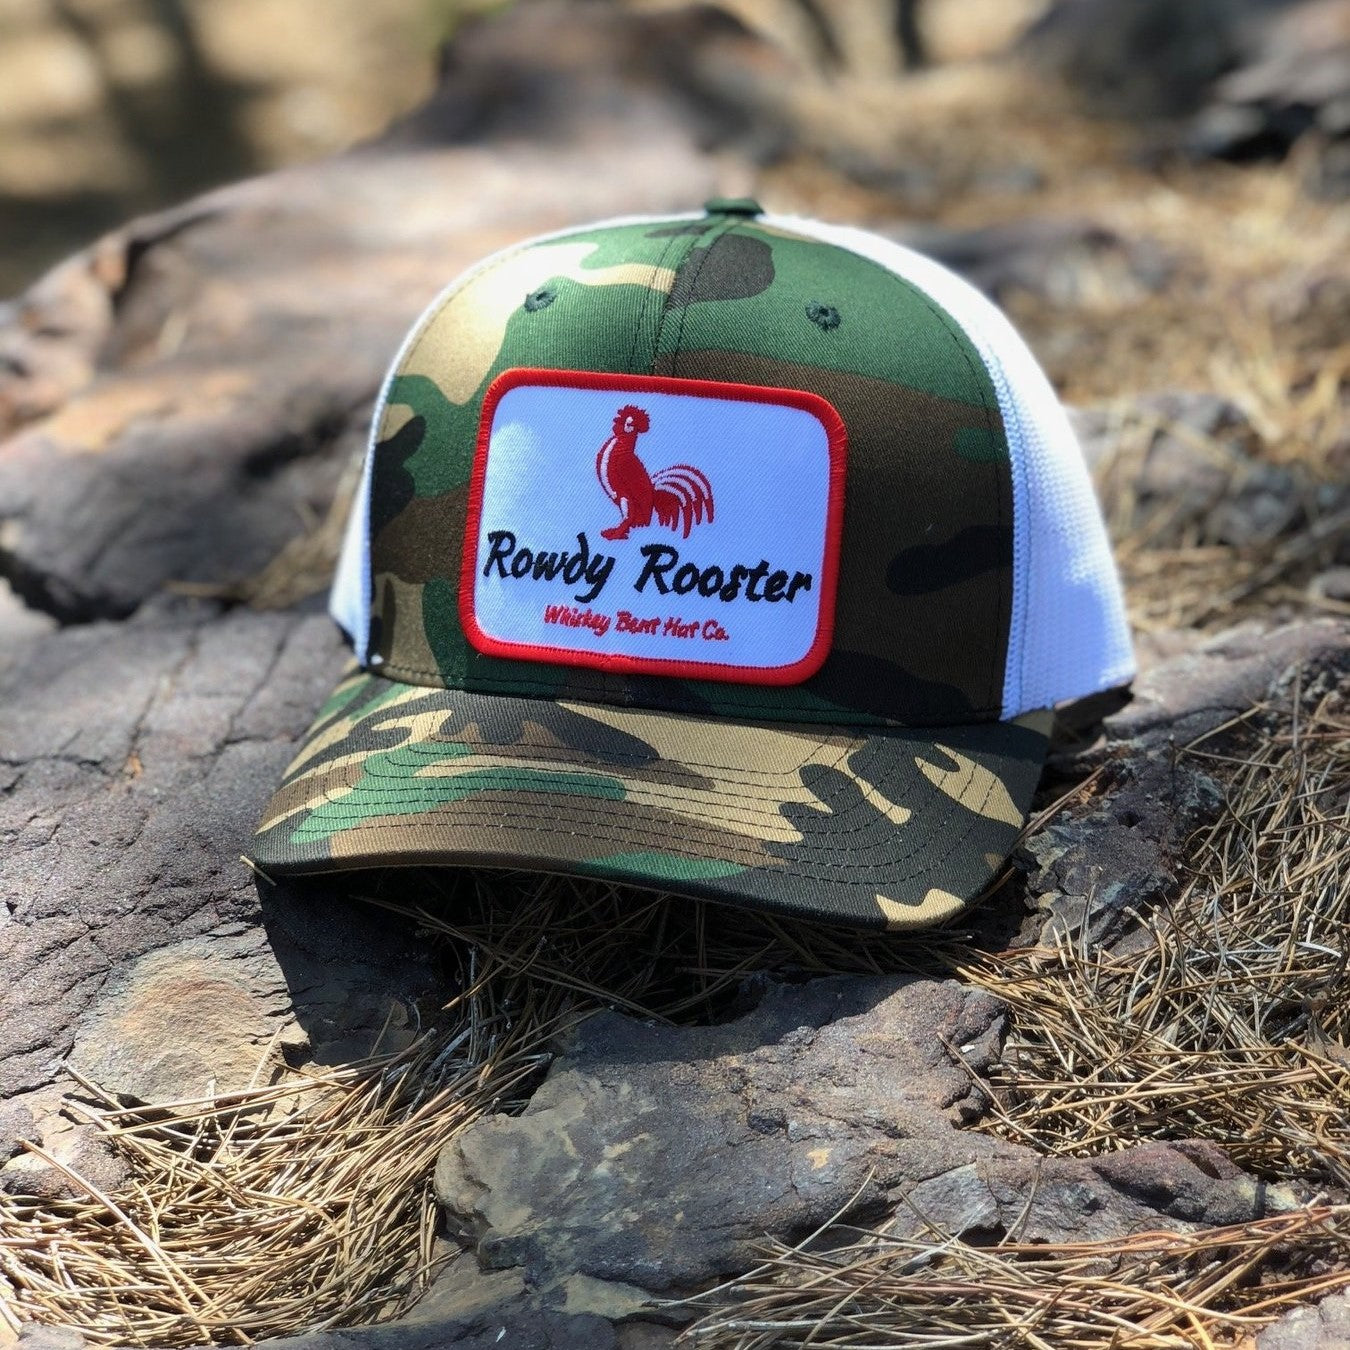 Whiskey Bent Men's Rowdy Rooster Camo/White Trucker Hat WB10-CAWH